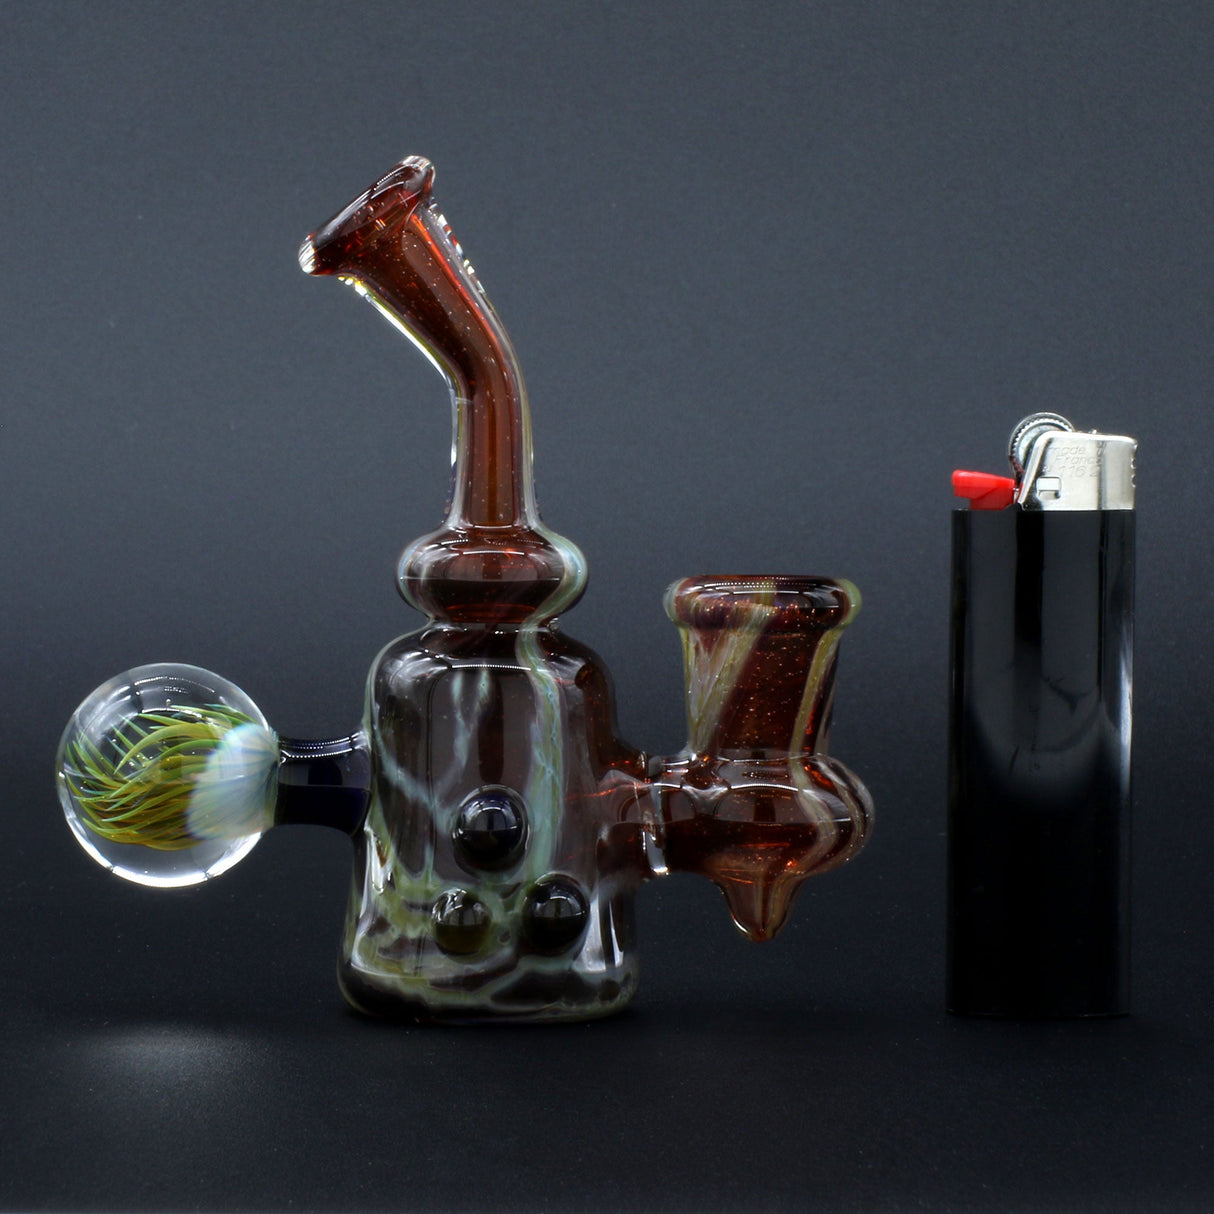 Clayball Glass "Blood Moon" Heady Sherlock Dab Rig with intricate design, side view next to lighter